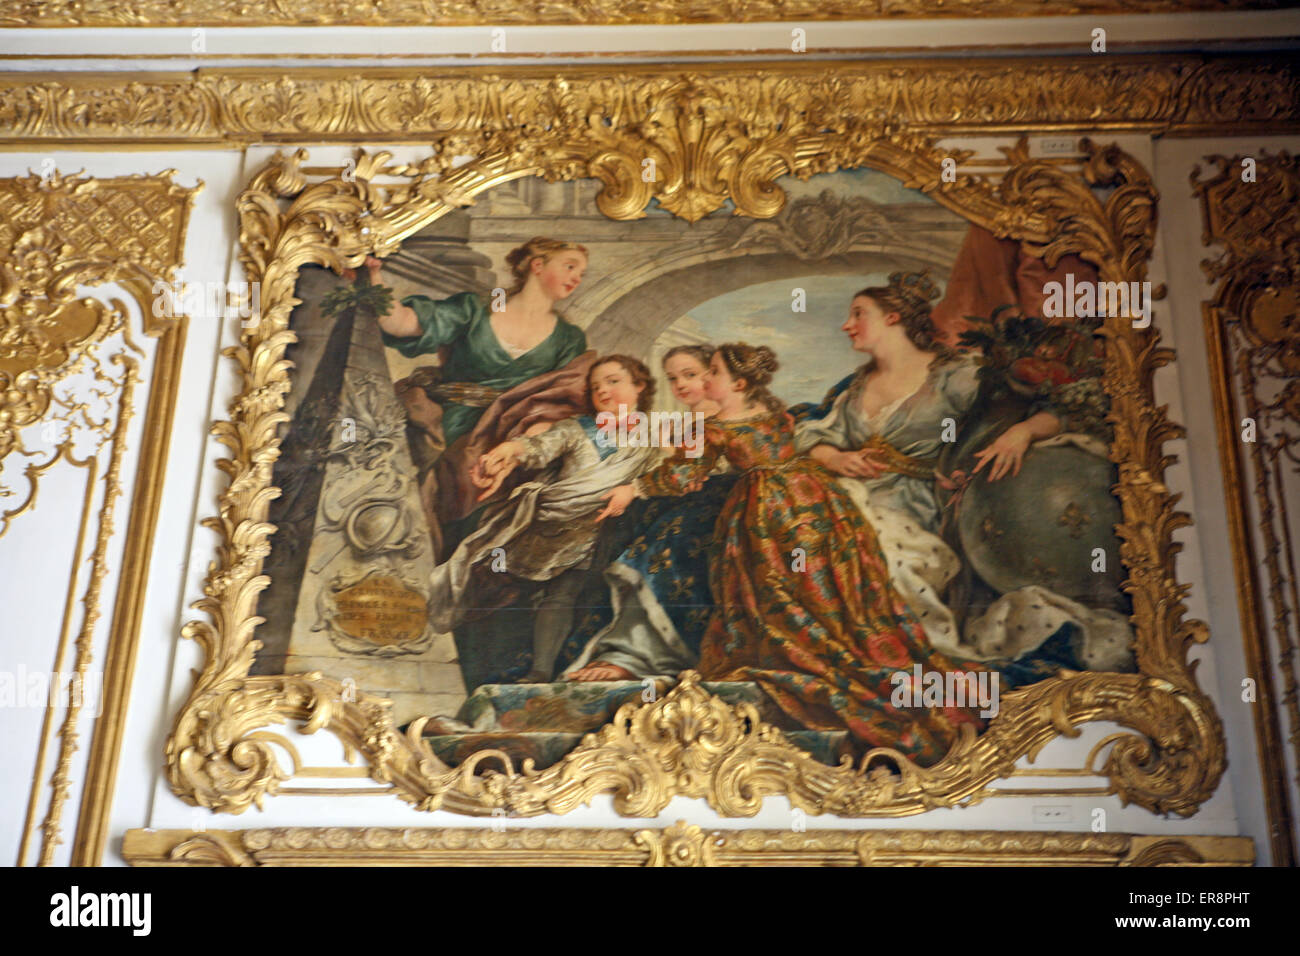 The Queens bedroom or bedchamber Palace  Versailles France Stock Photo